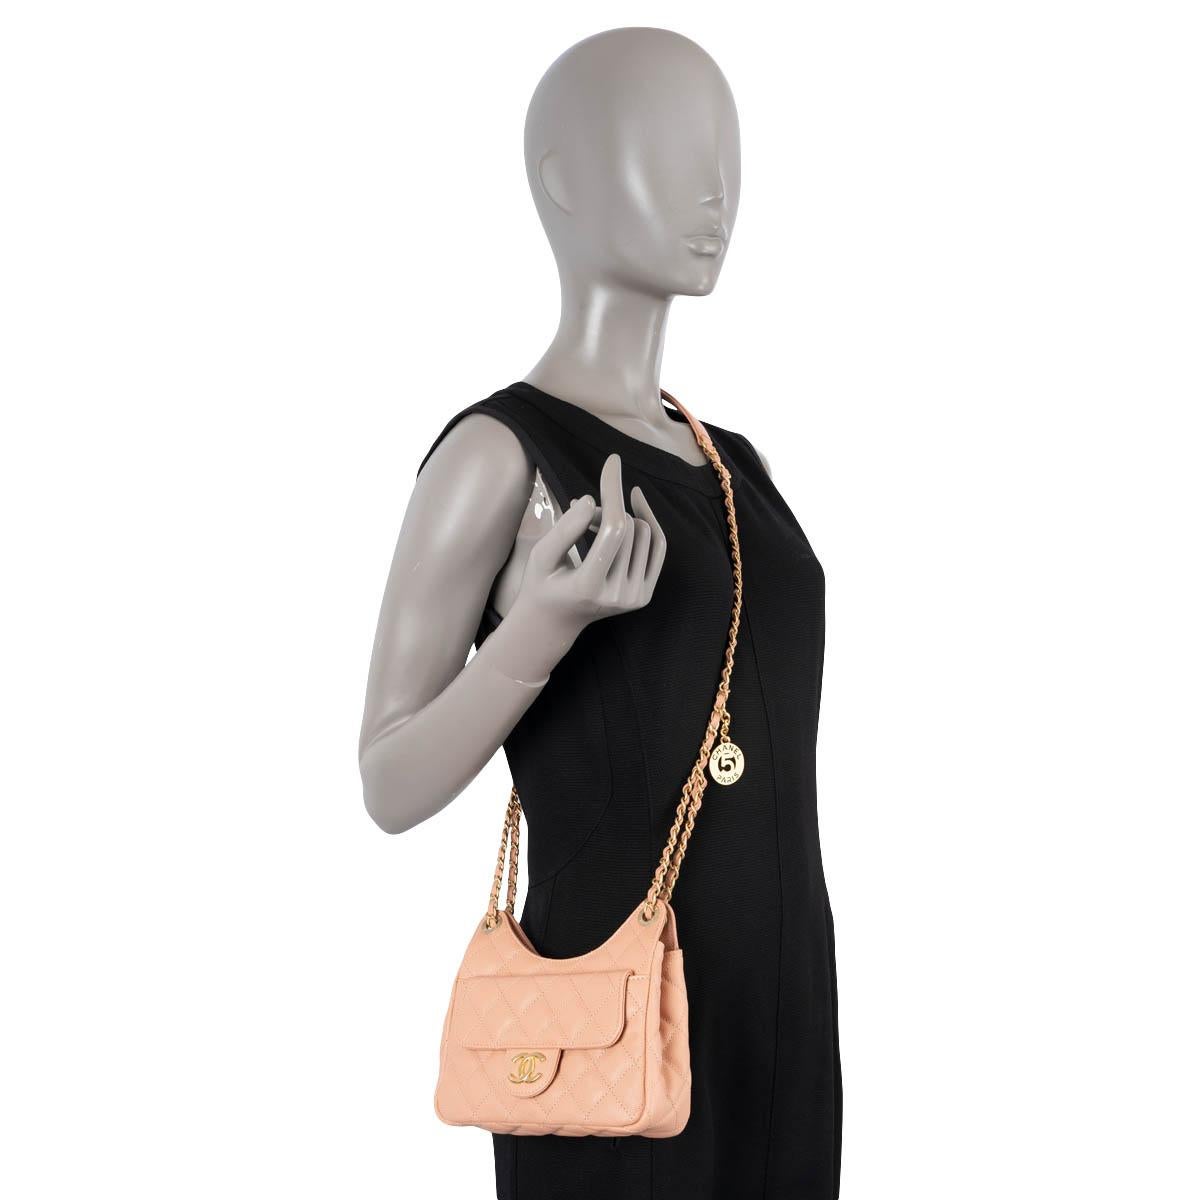 CHANEL beige peach Caviar leather SMALL WAVY HOBO Shoulder Bag NM375 For Sale 7